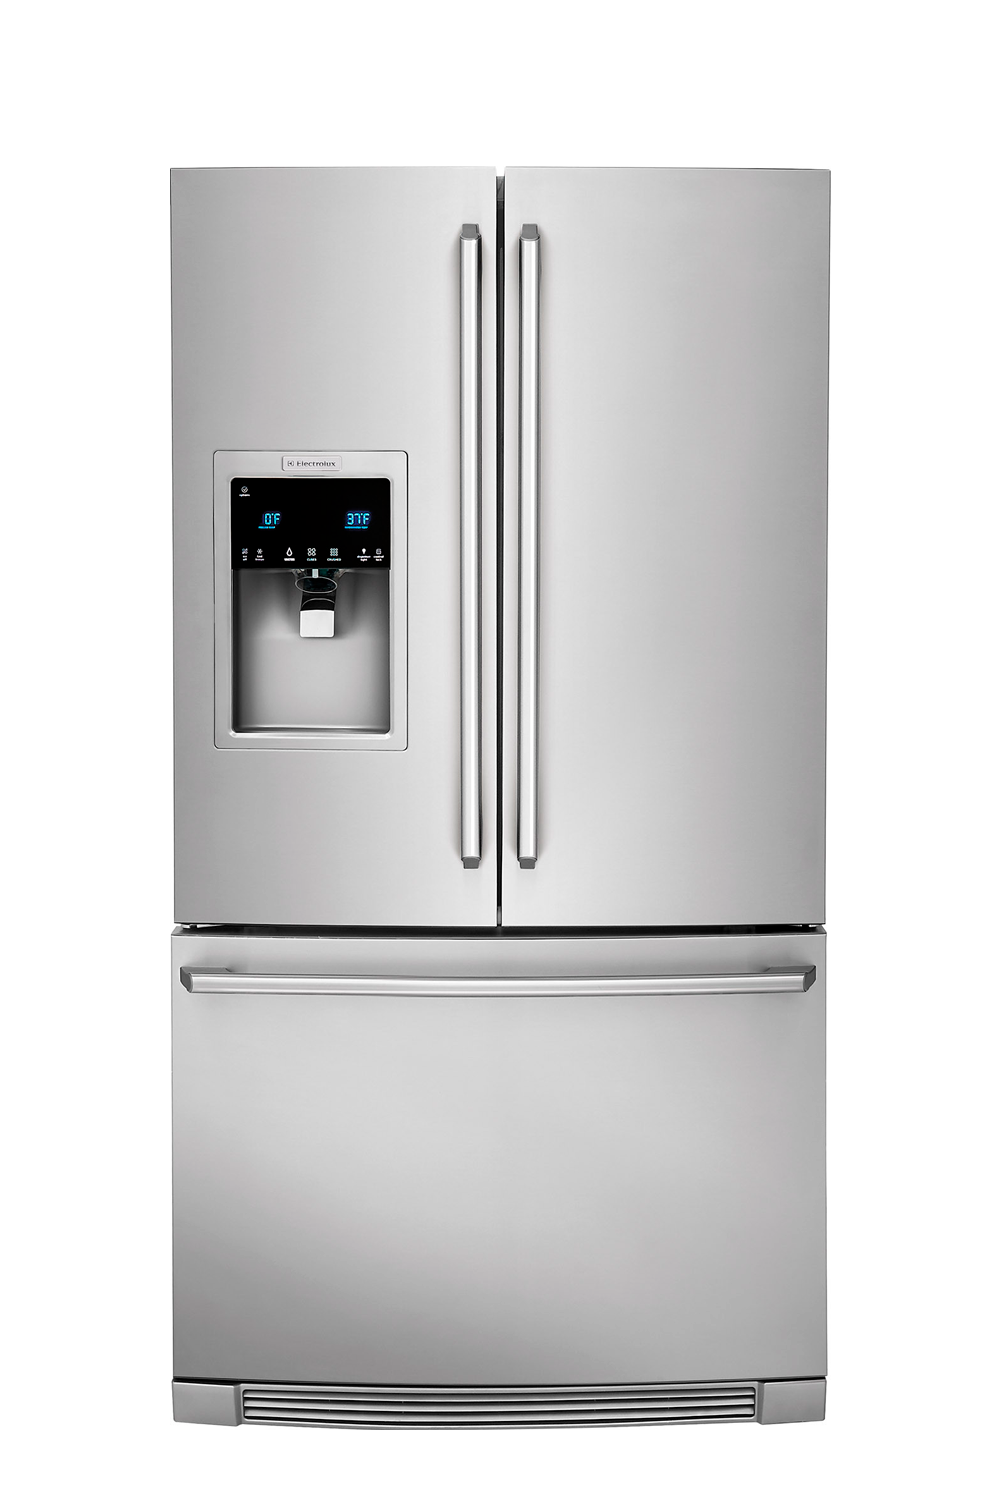 7 Best Counter Depth Refrigerators According To Kitchen Appliance Experts Top Counter Depth